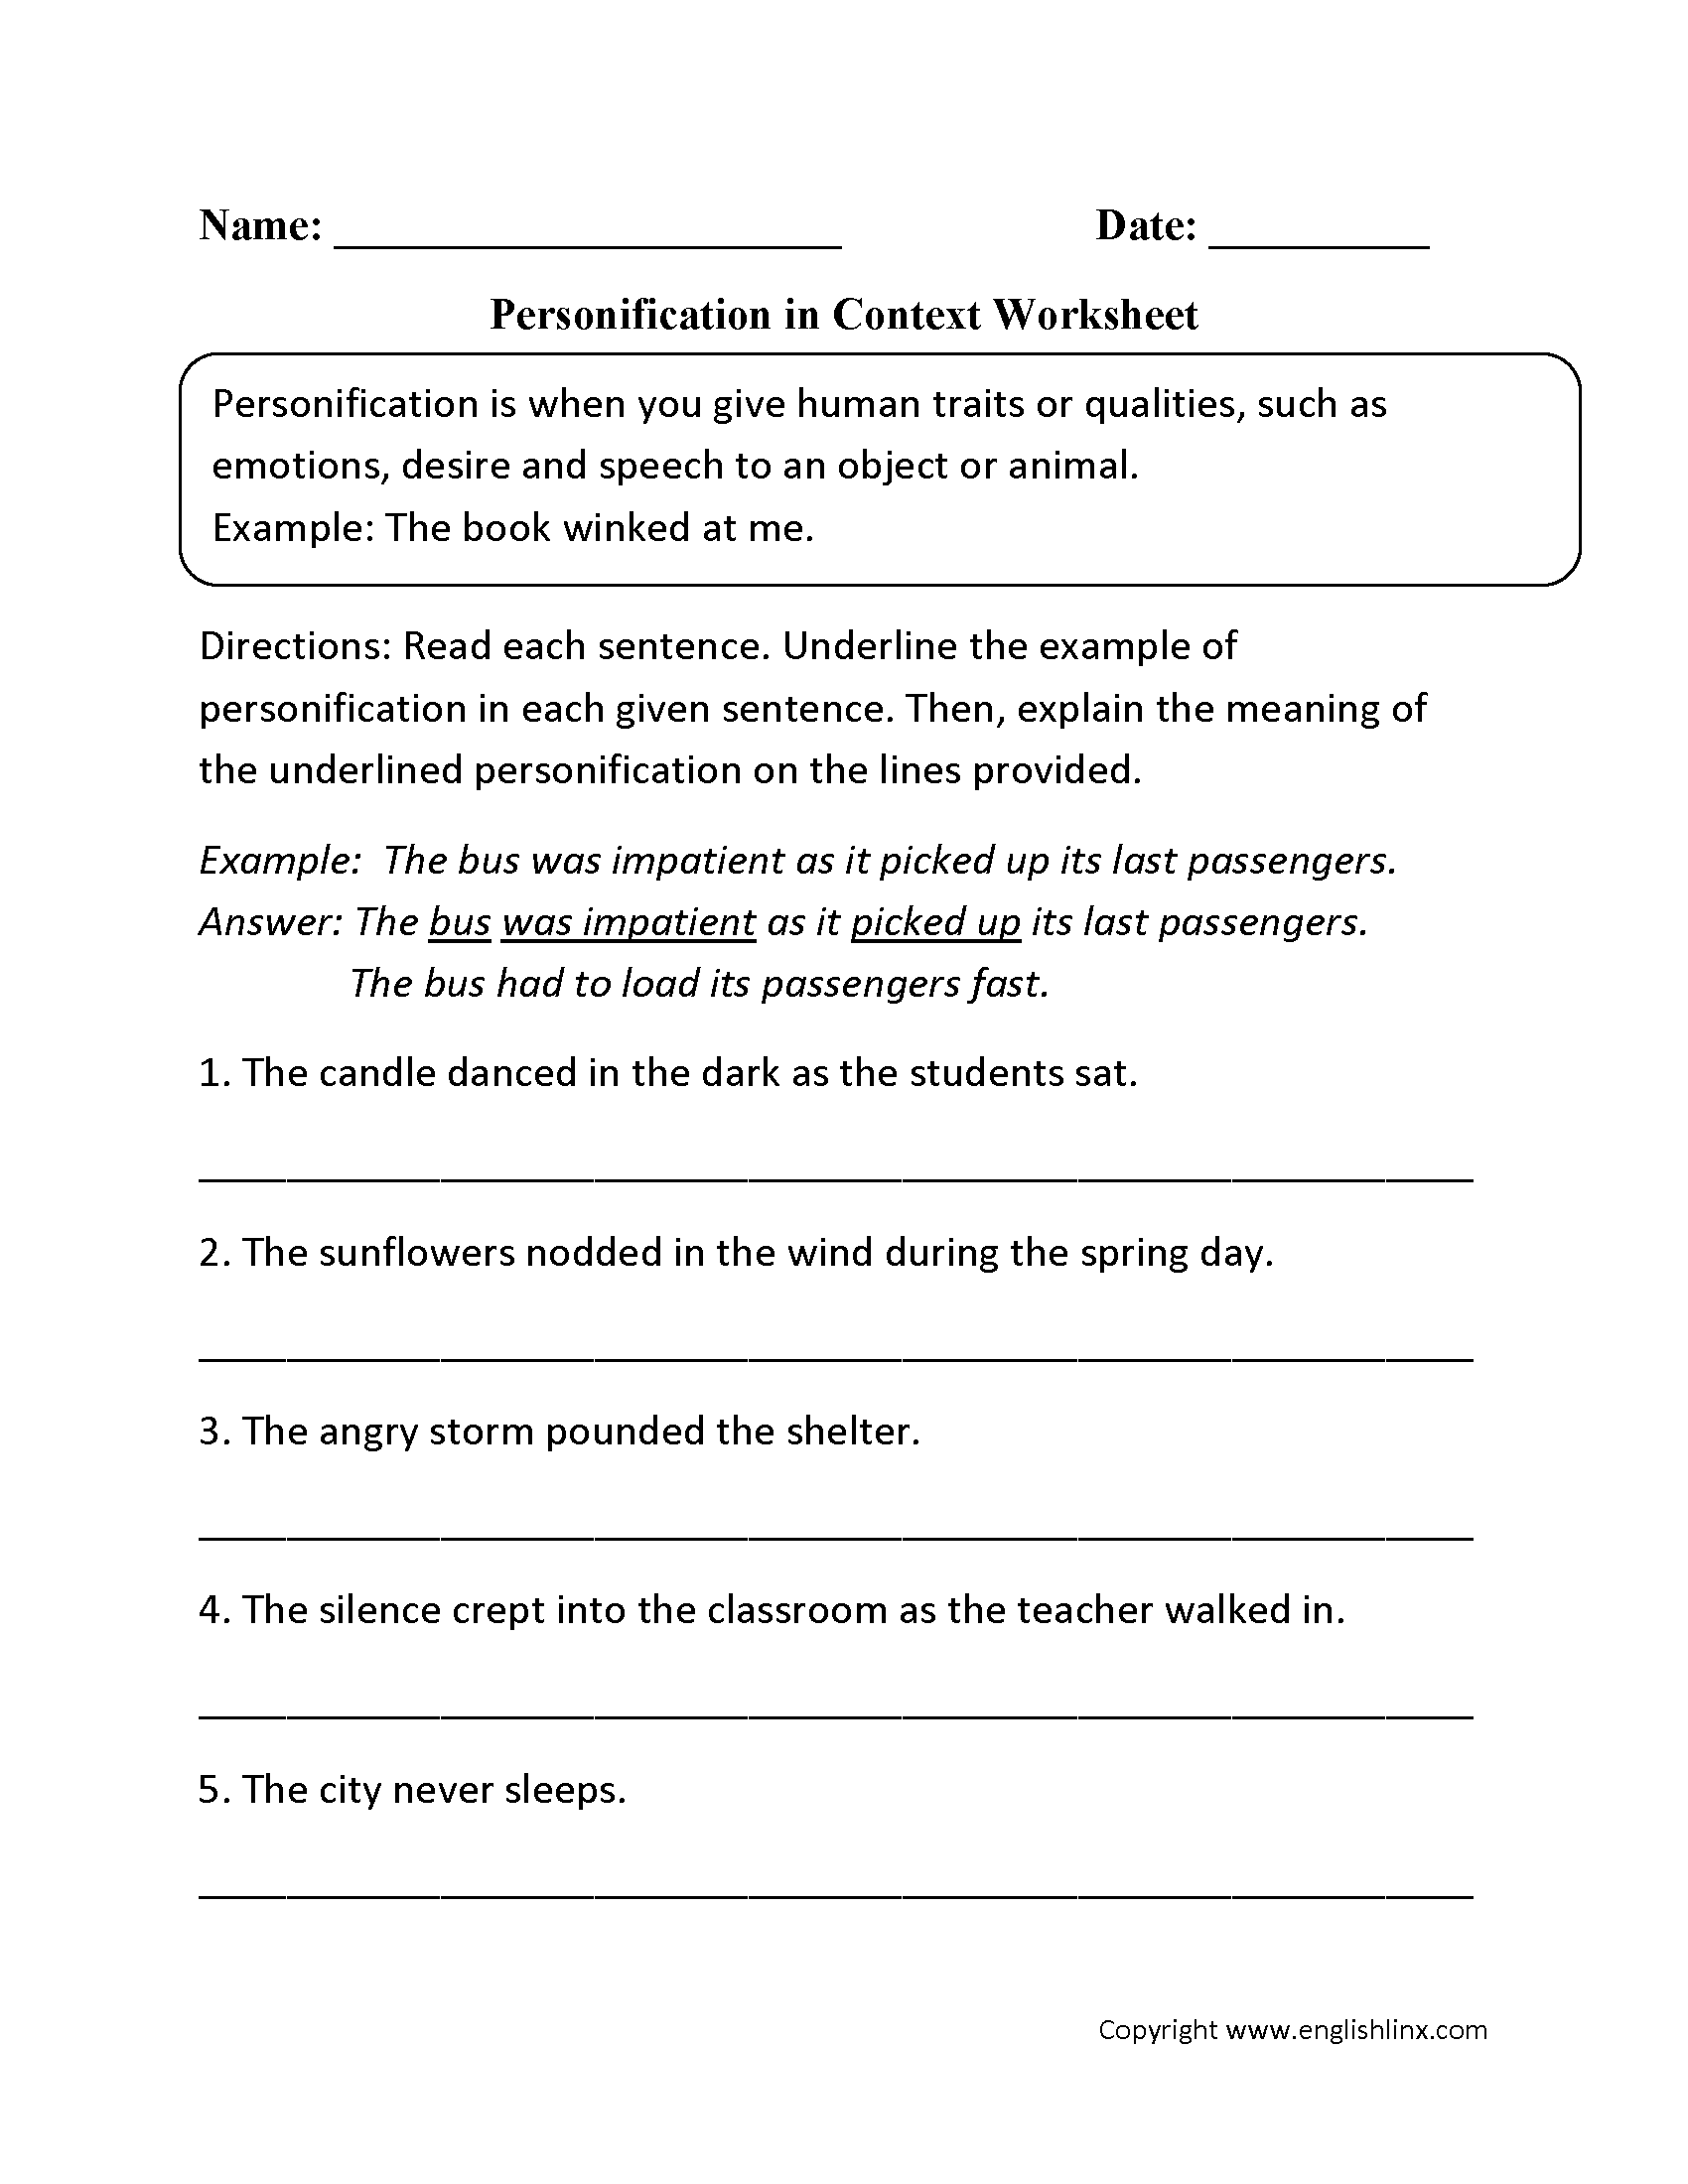 Personification in Context Worksheet